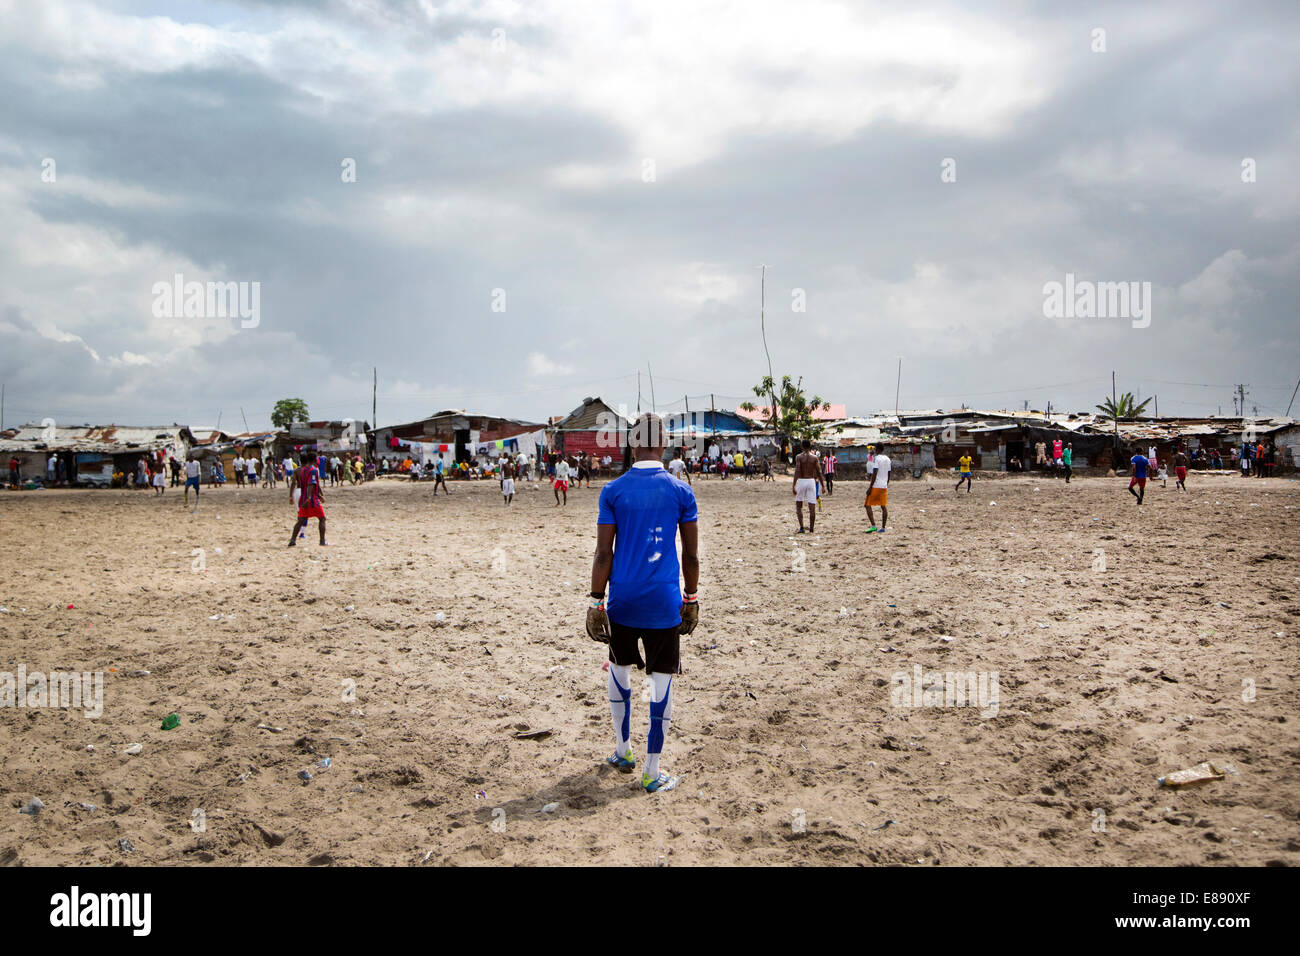 Men in the township of West Point passed the time by playing soccer during the quarantine. Monrovia, Liberia 2014-08-29 06:20:38 Stock Photo